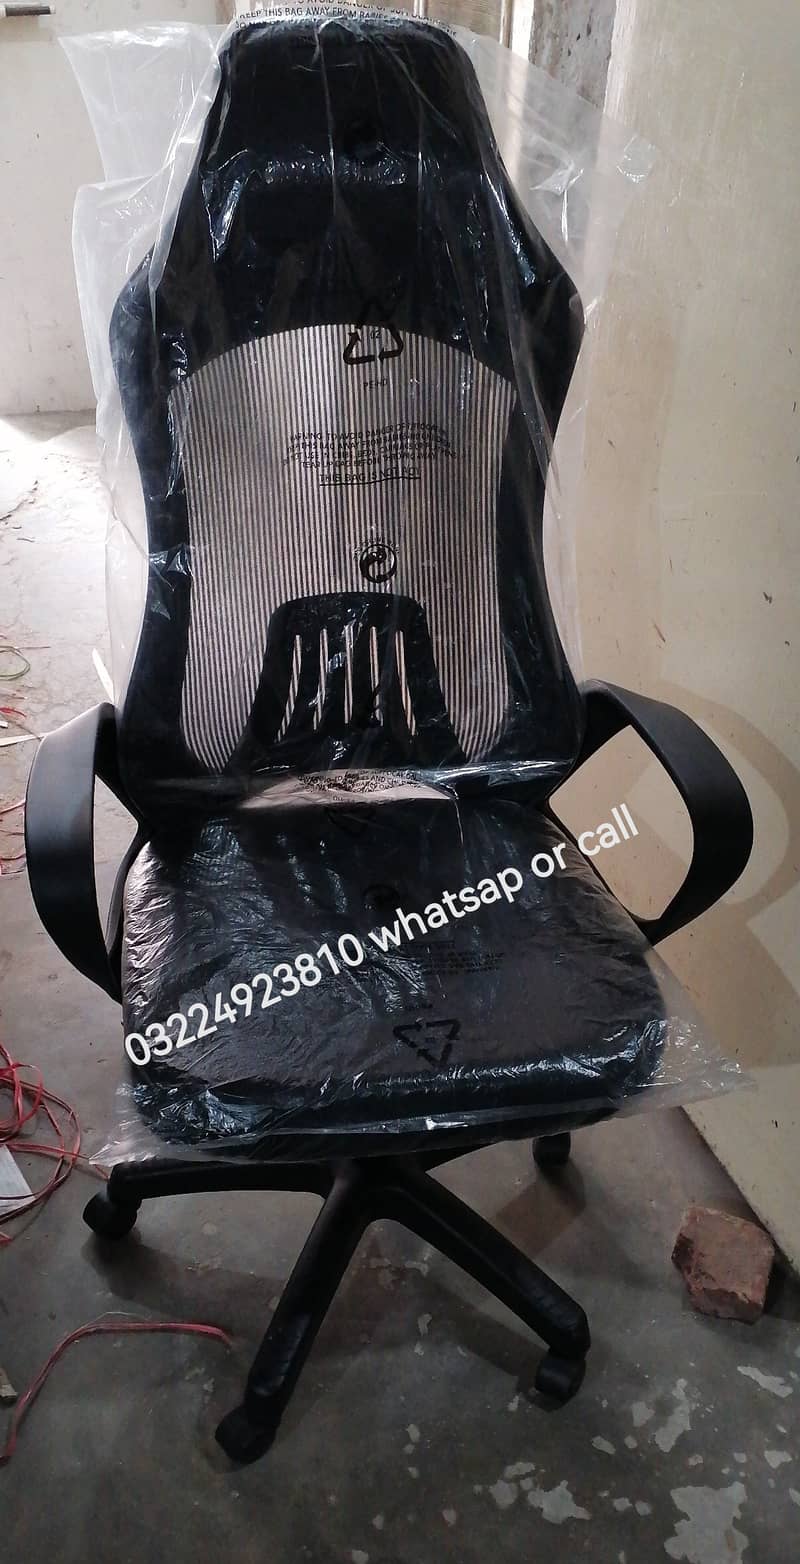 Executive / manager chairs boss chair, mesh chairs, headrest chair 5